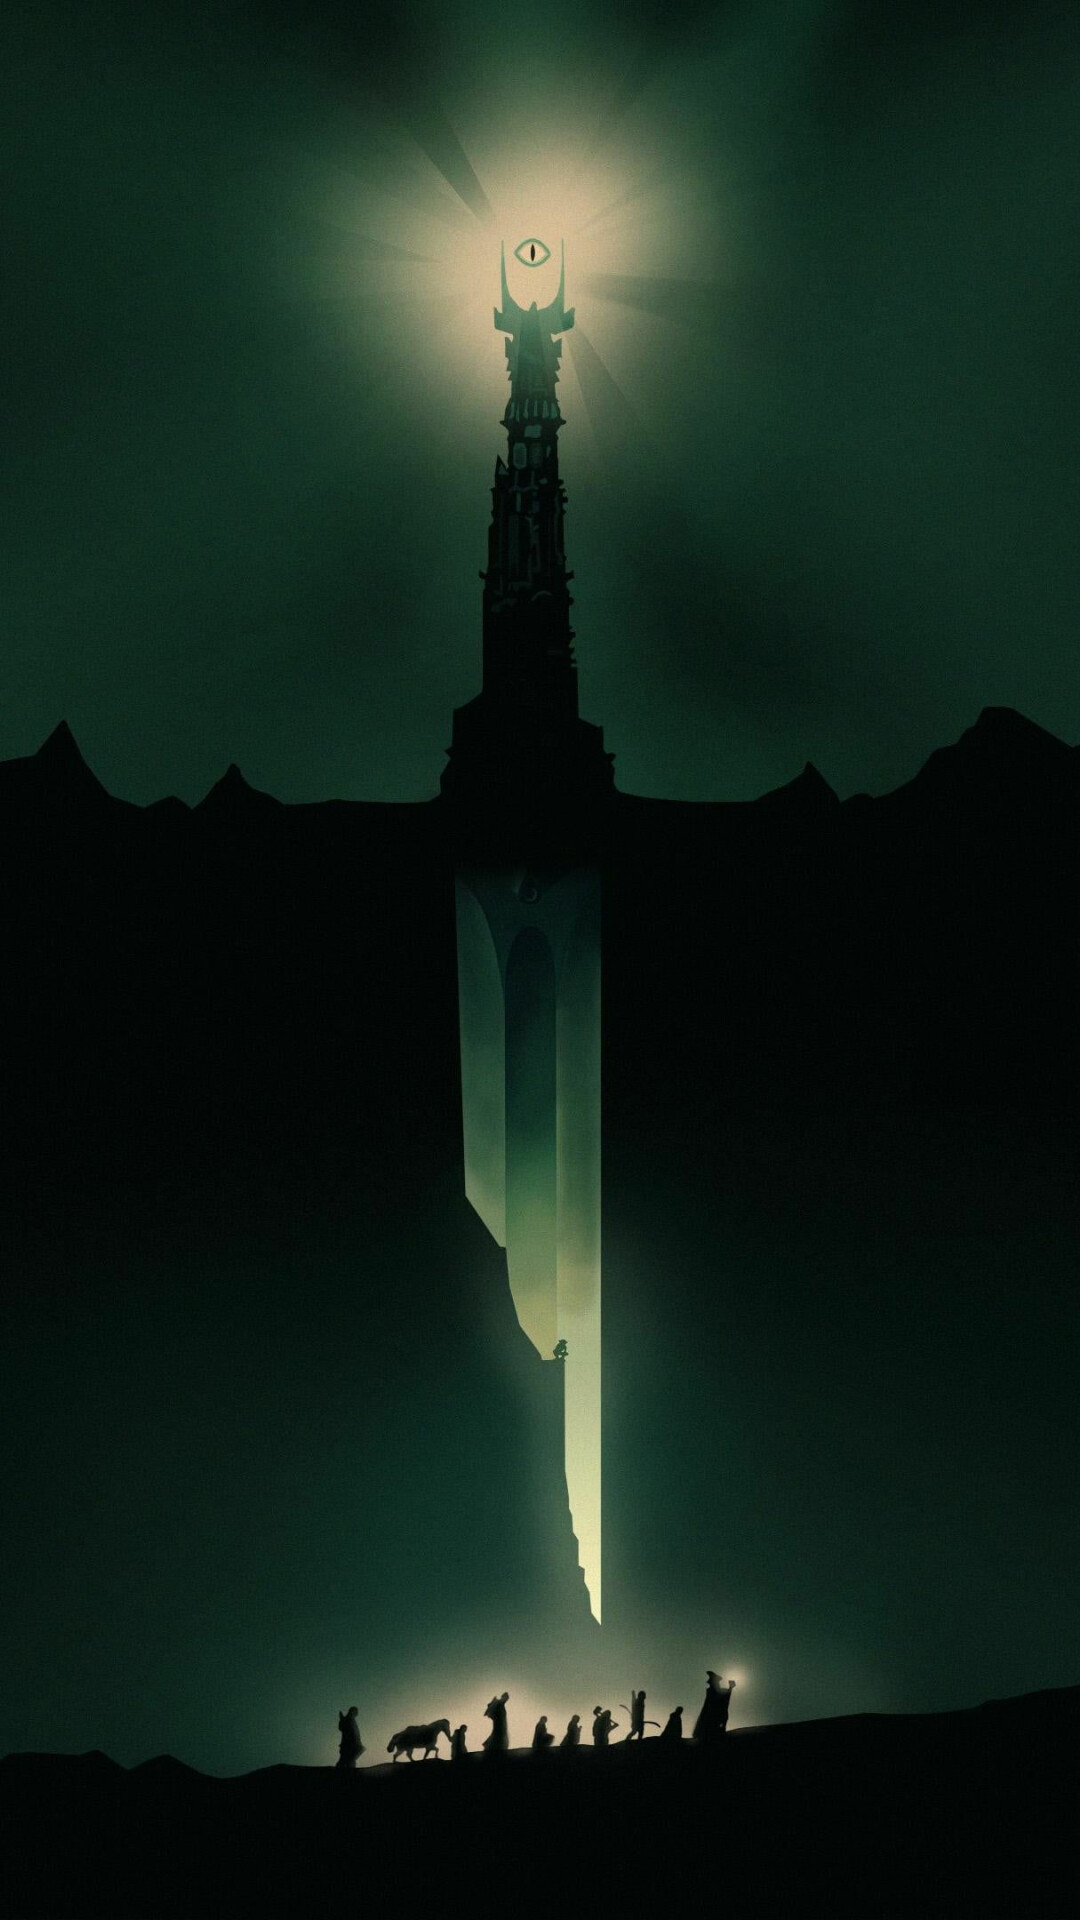 The Lord of the Rings: The Fellowship of the Ring, A 2001 epic fantasy adventure film directed by Peter Jackson, Minimalistic. 1080x1920 Full HD Background.